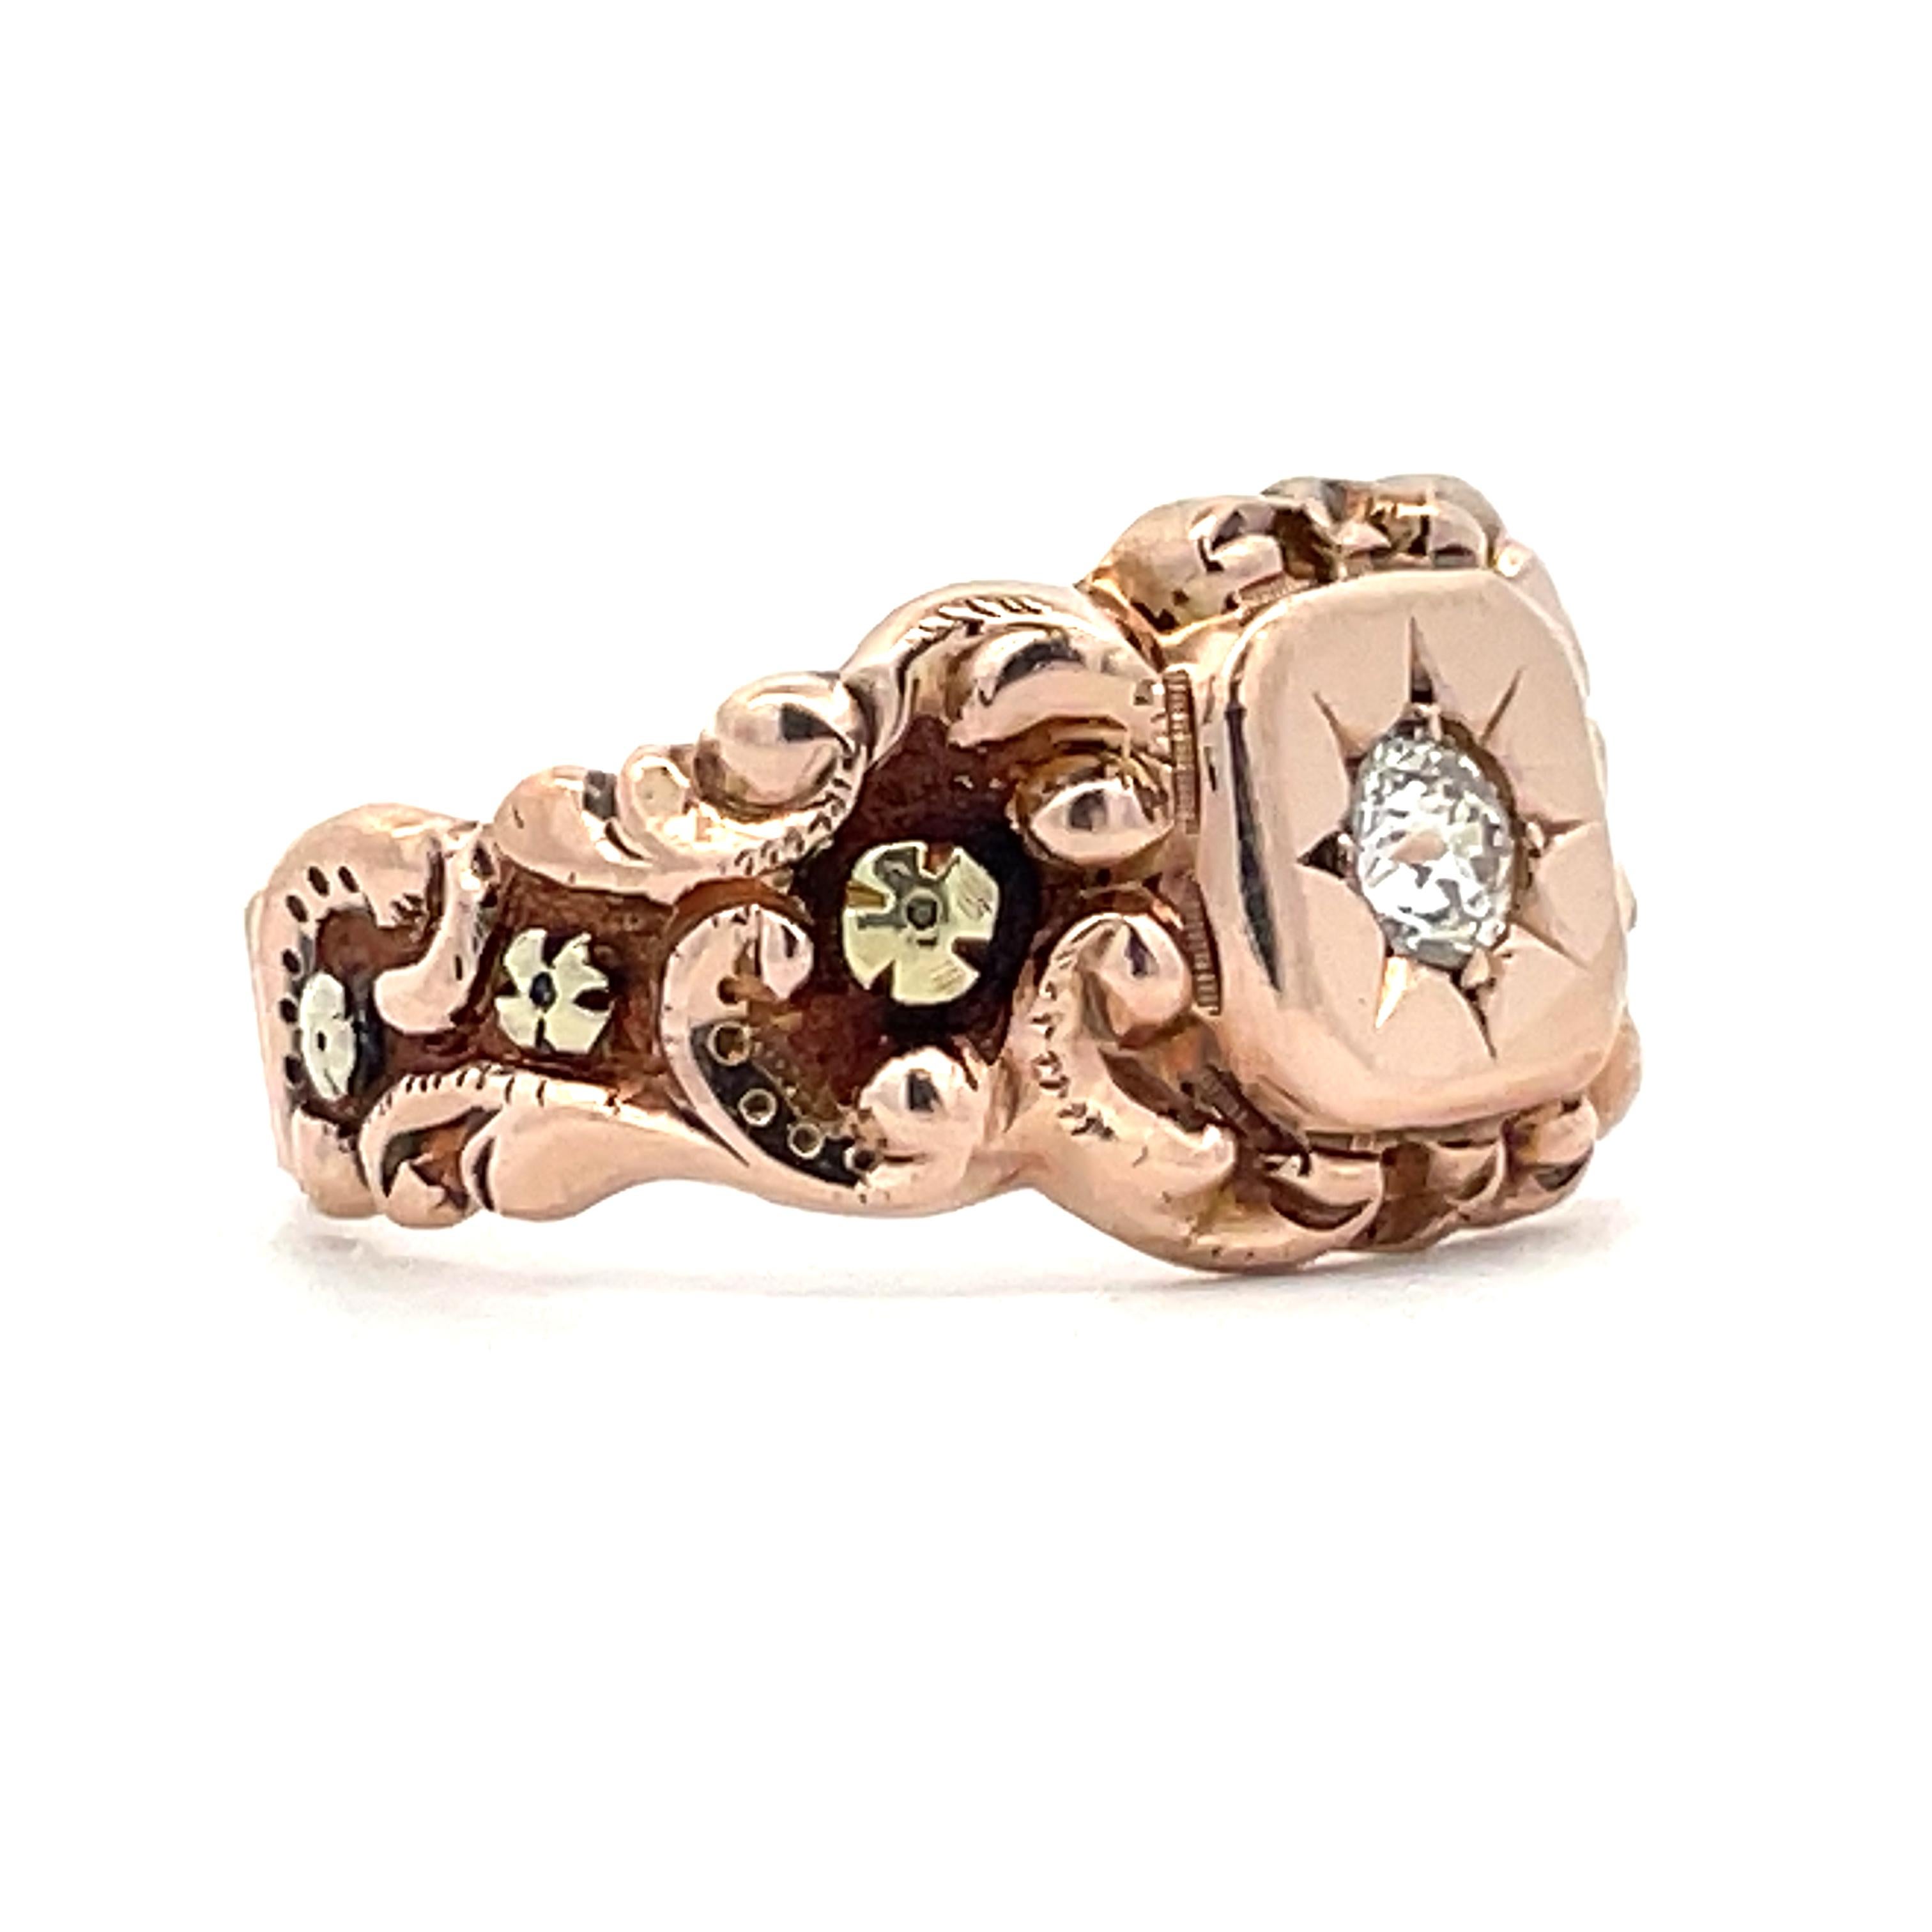 Round Cut 1880 14K Rose Gold Victorian Ring & Applied Green Gold Florets with Euro Cut DIA For Sale